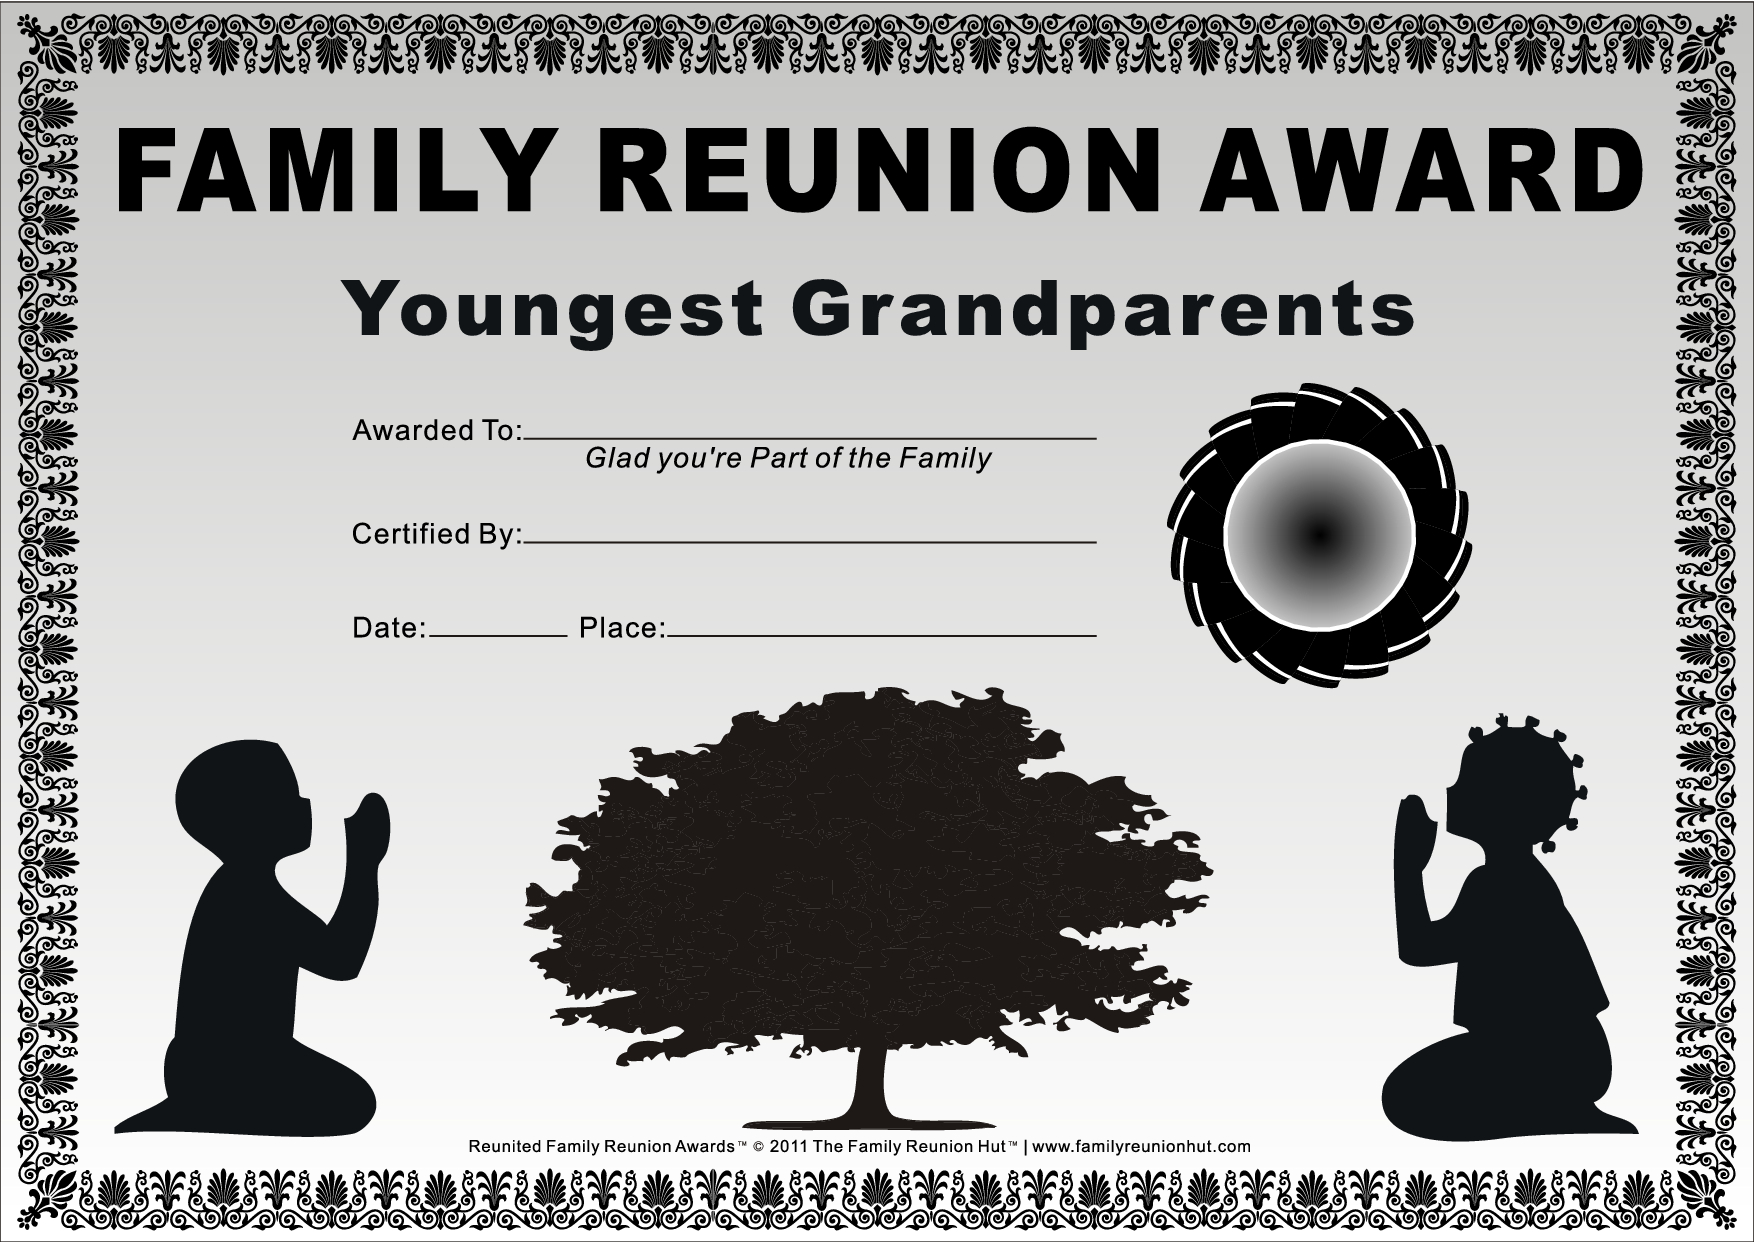 Family Reunion Activities |  Prayer 1 Is A Free Family Reunion - Free Printable Family Reunion Awards